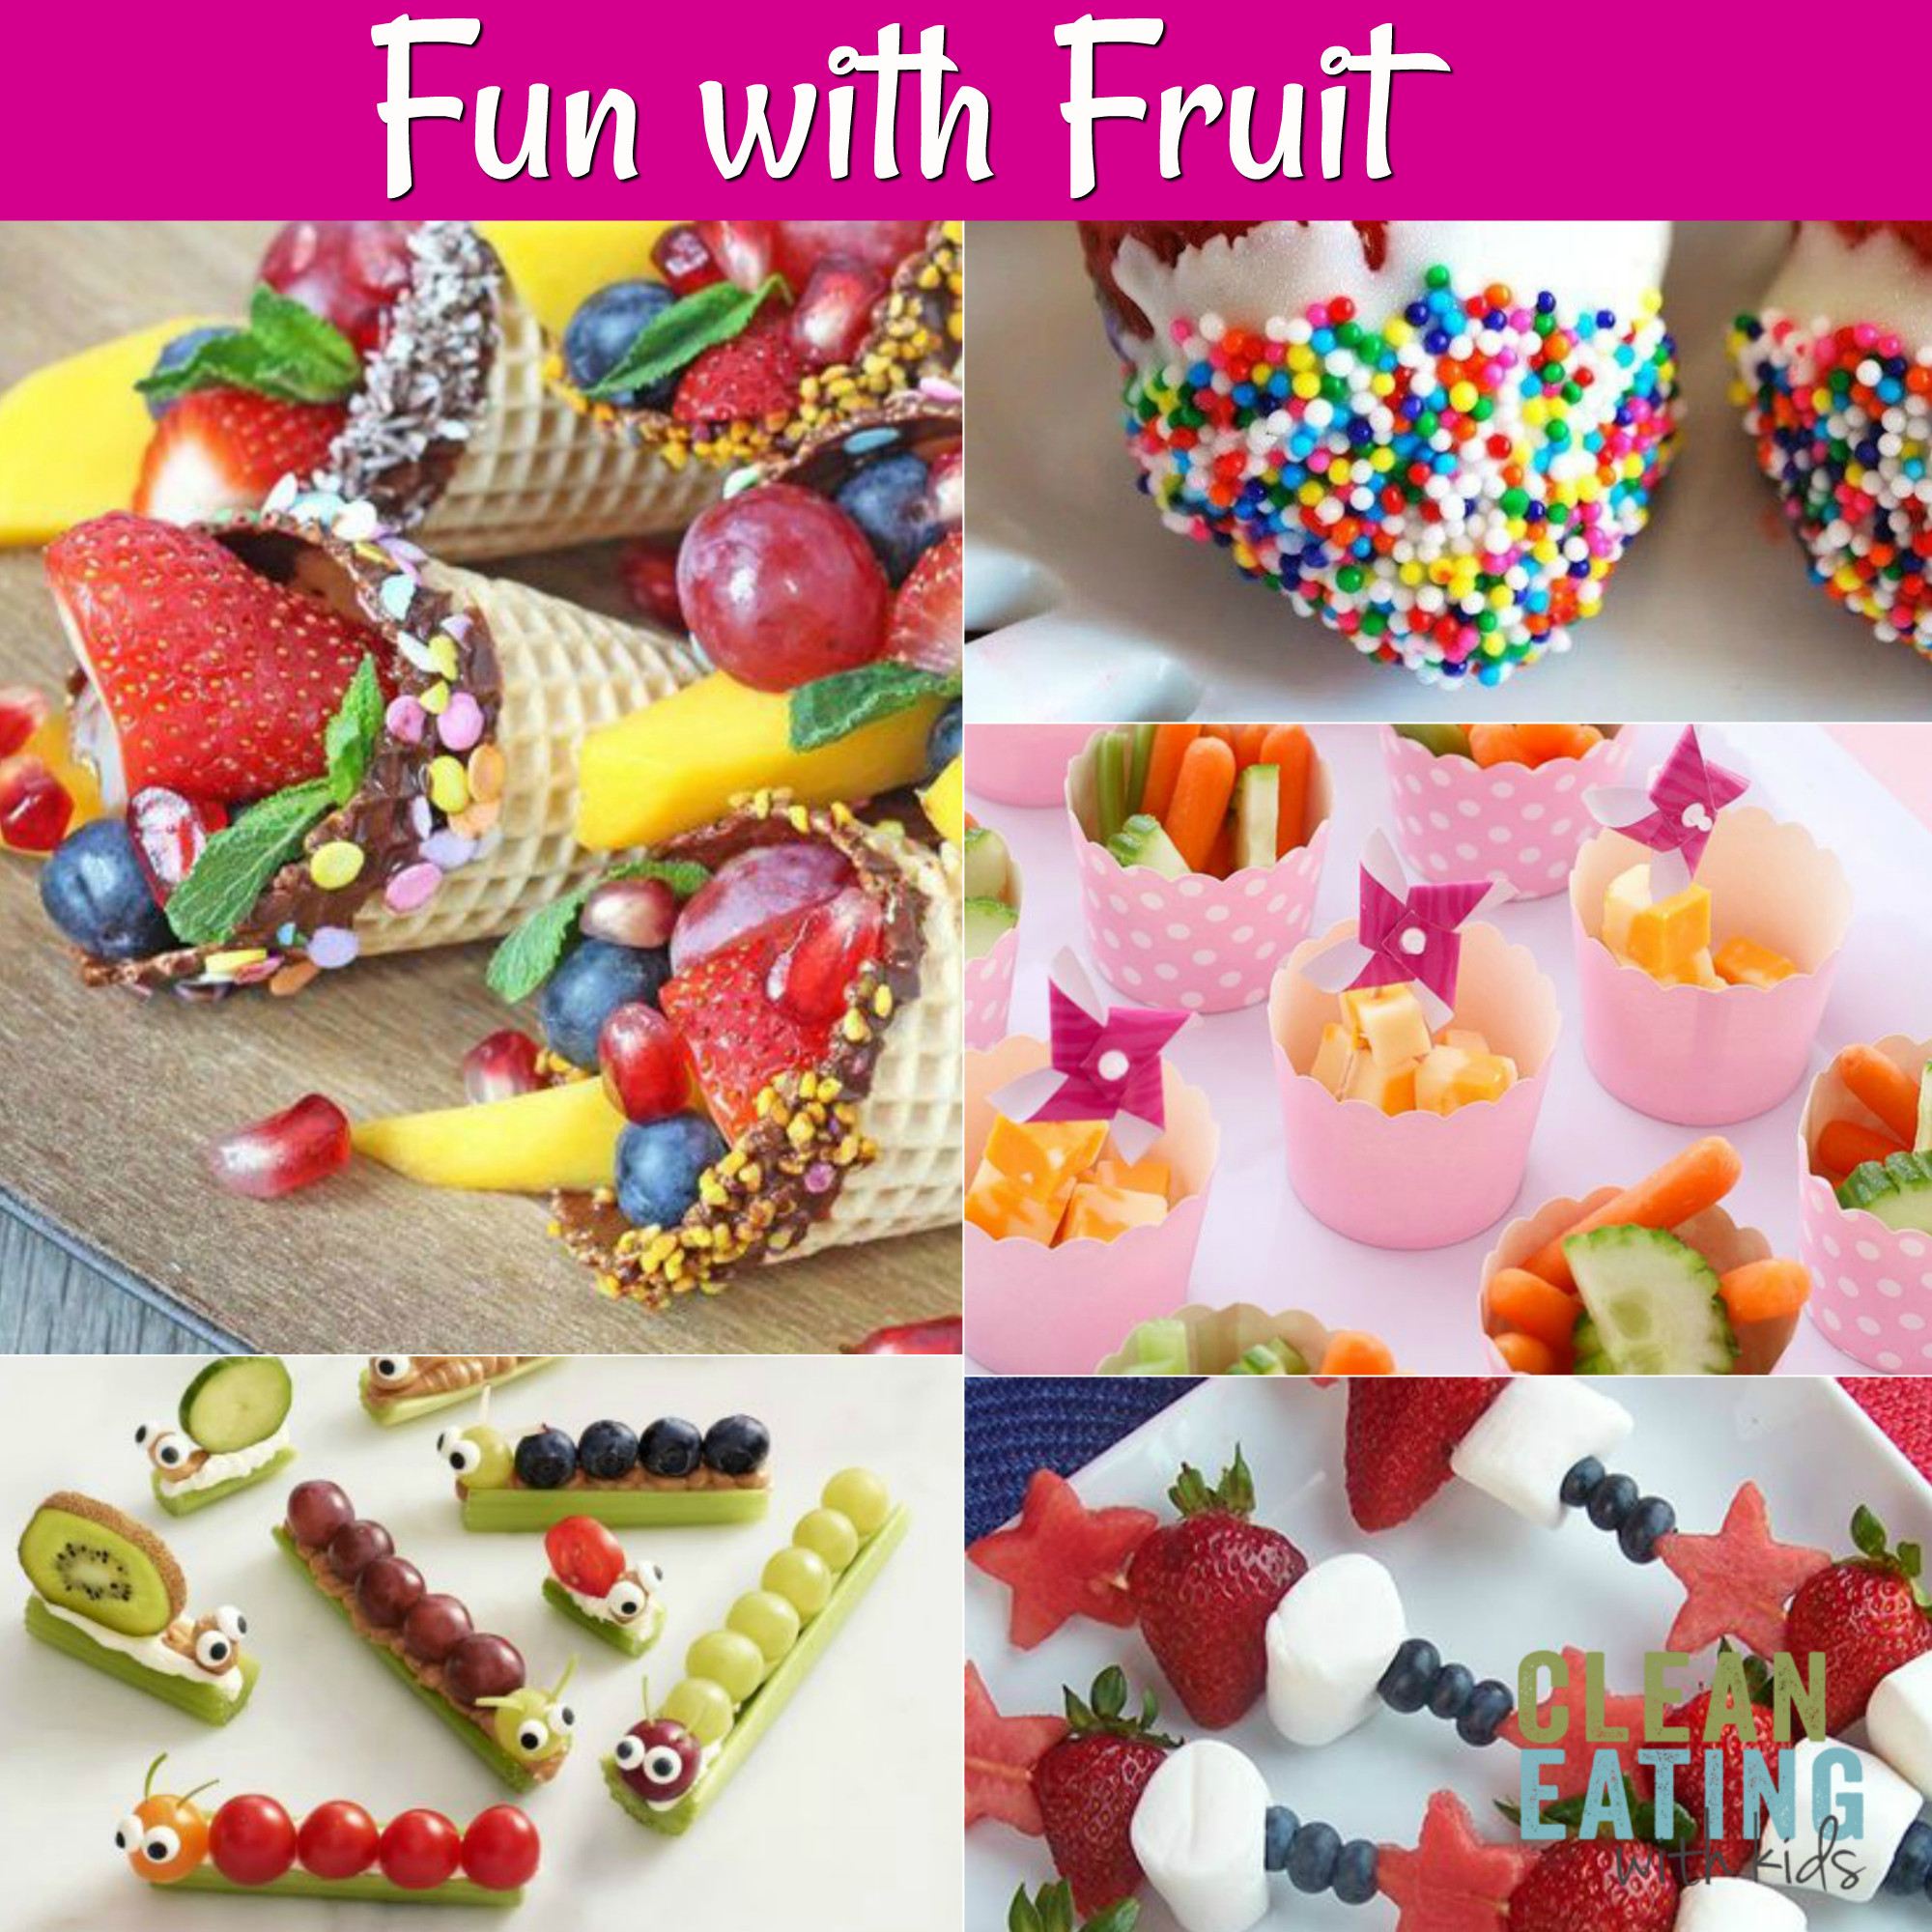 Party Food Ideas For Teenagers
 25 Healthy Birthday Party Food Ideas Clean Eating with kids